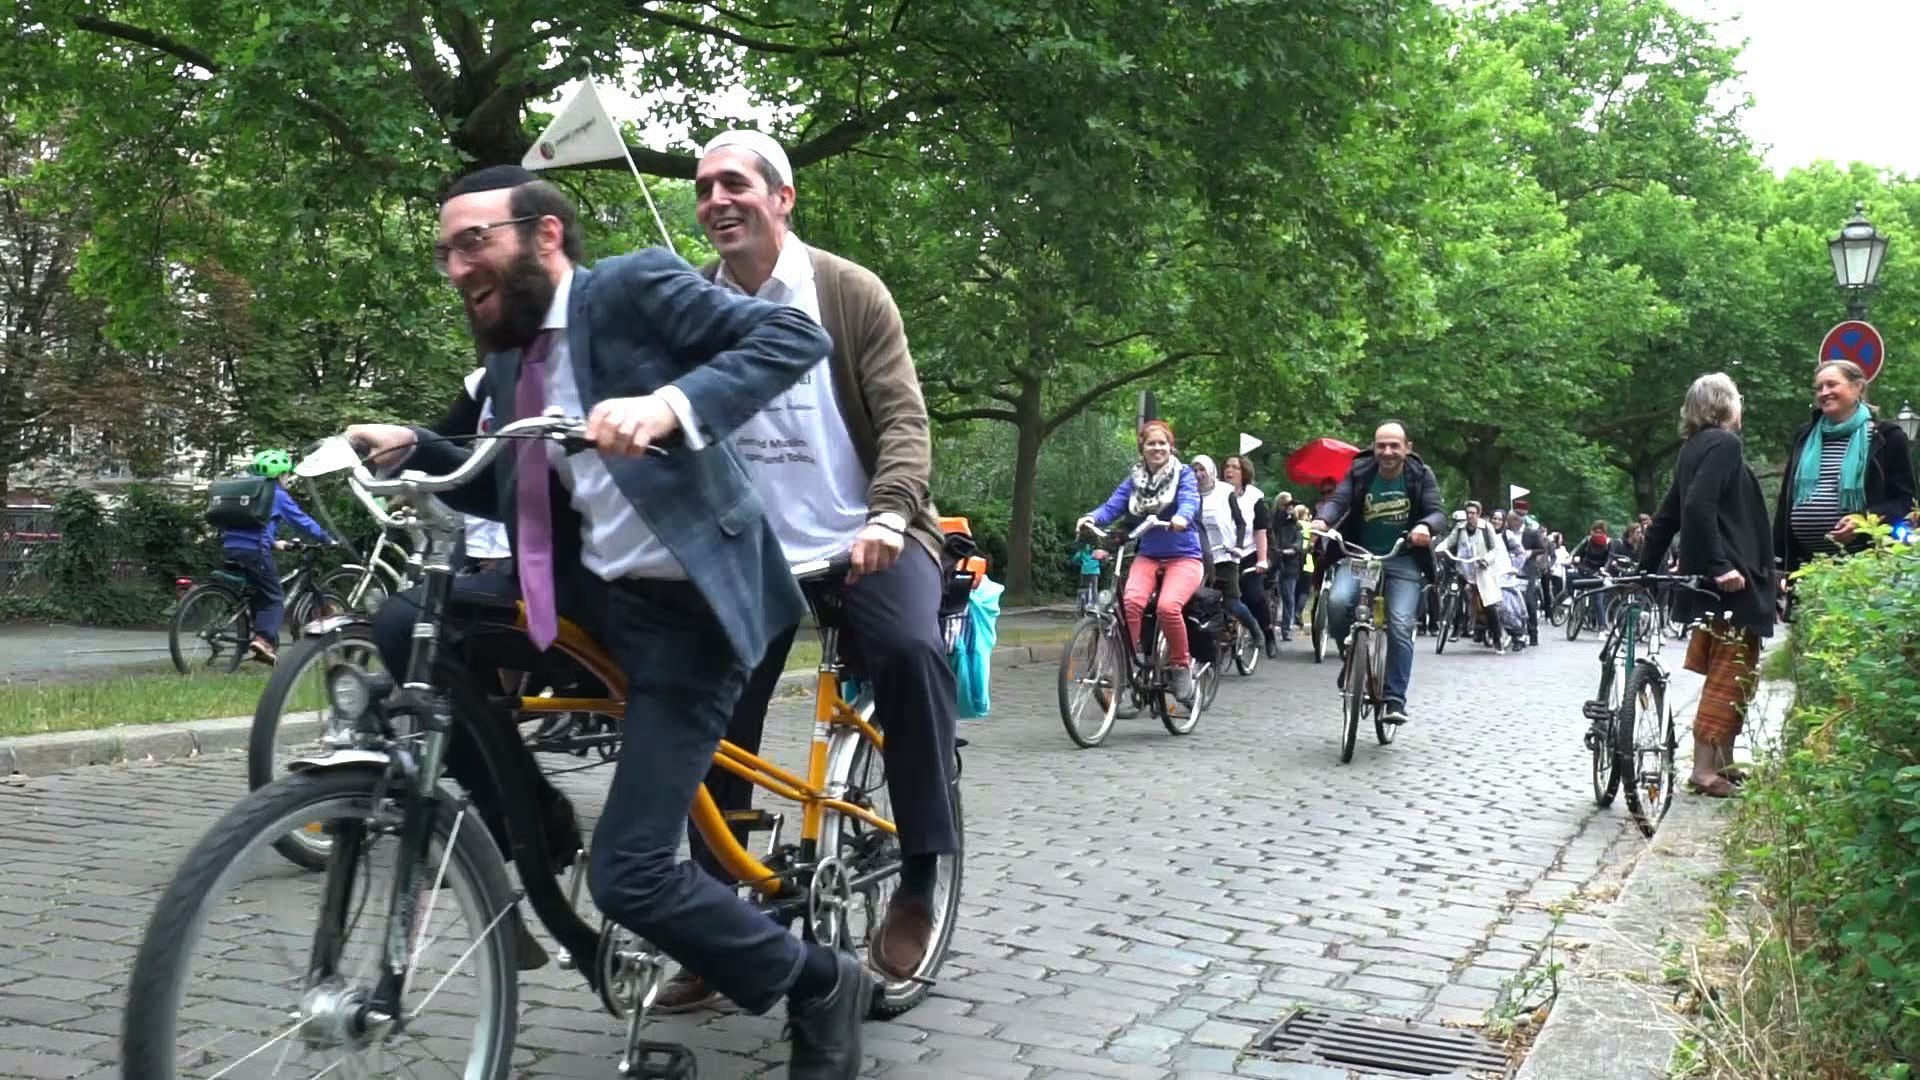 Imams, rabbis ride tandems in Berlin rally for mutual respect